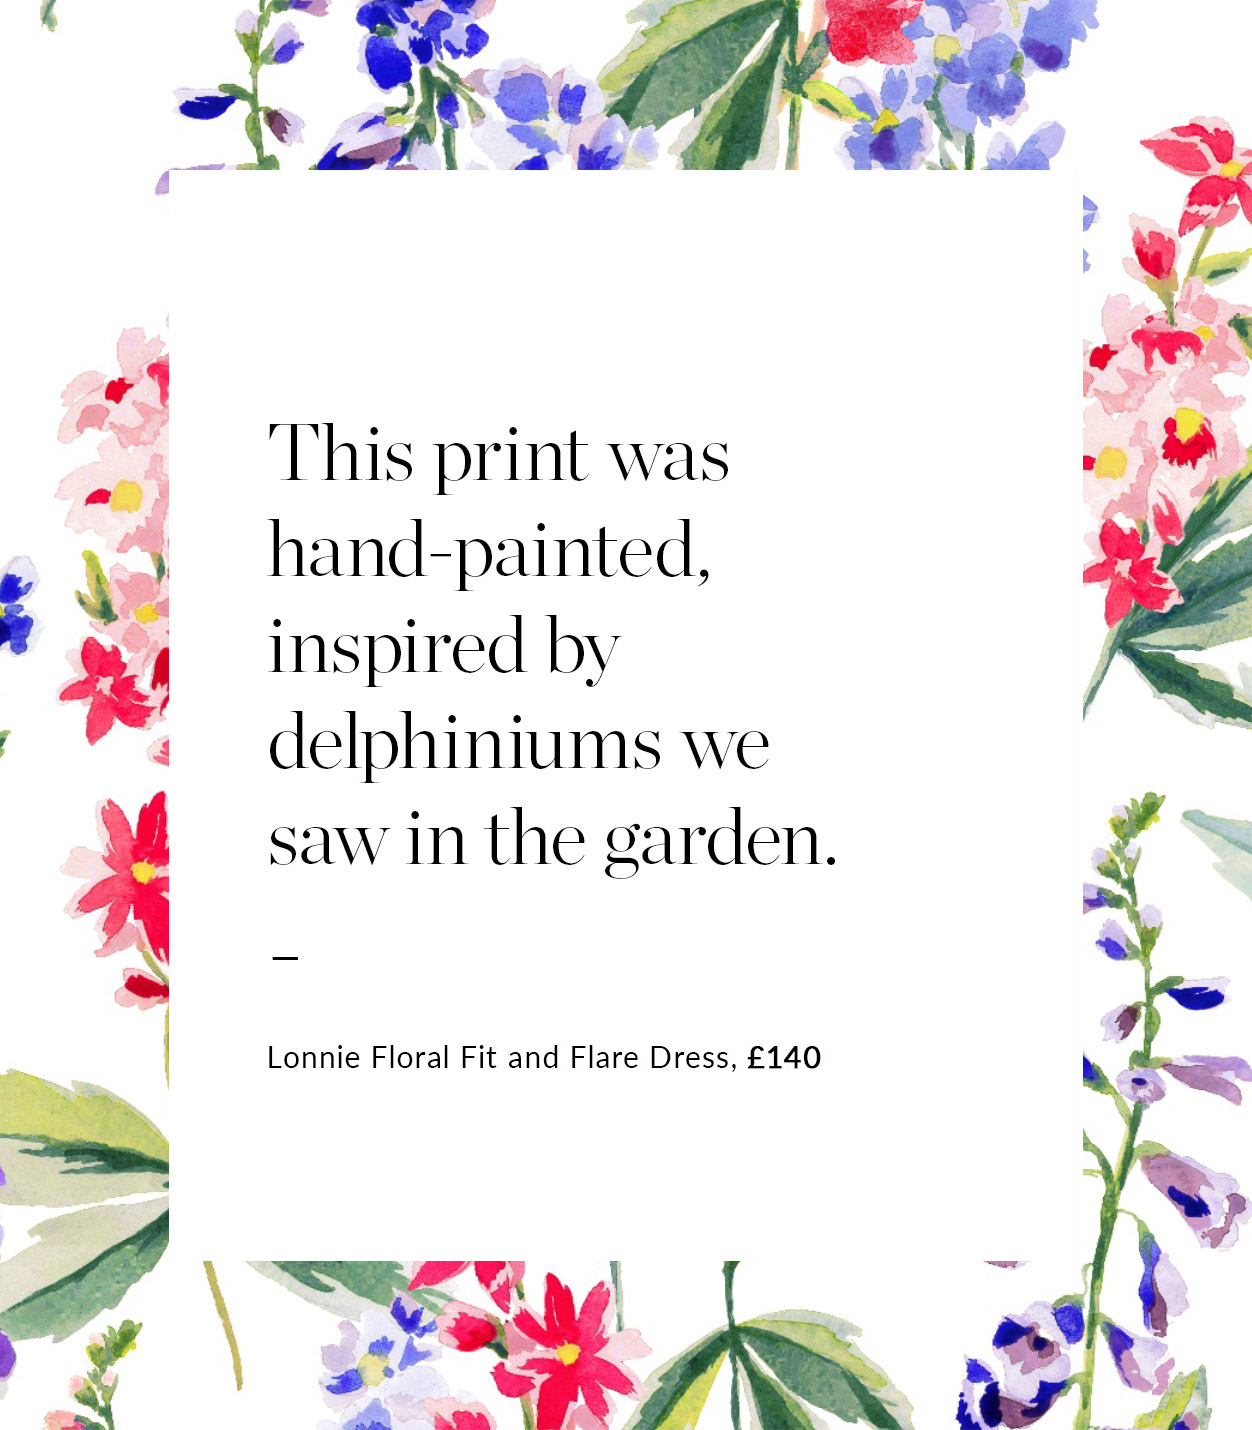 This print was hand painted, inspired by delphiniums we saw in the garden